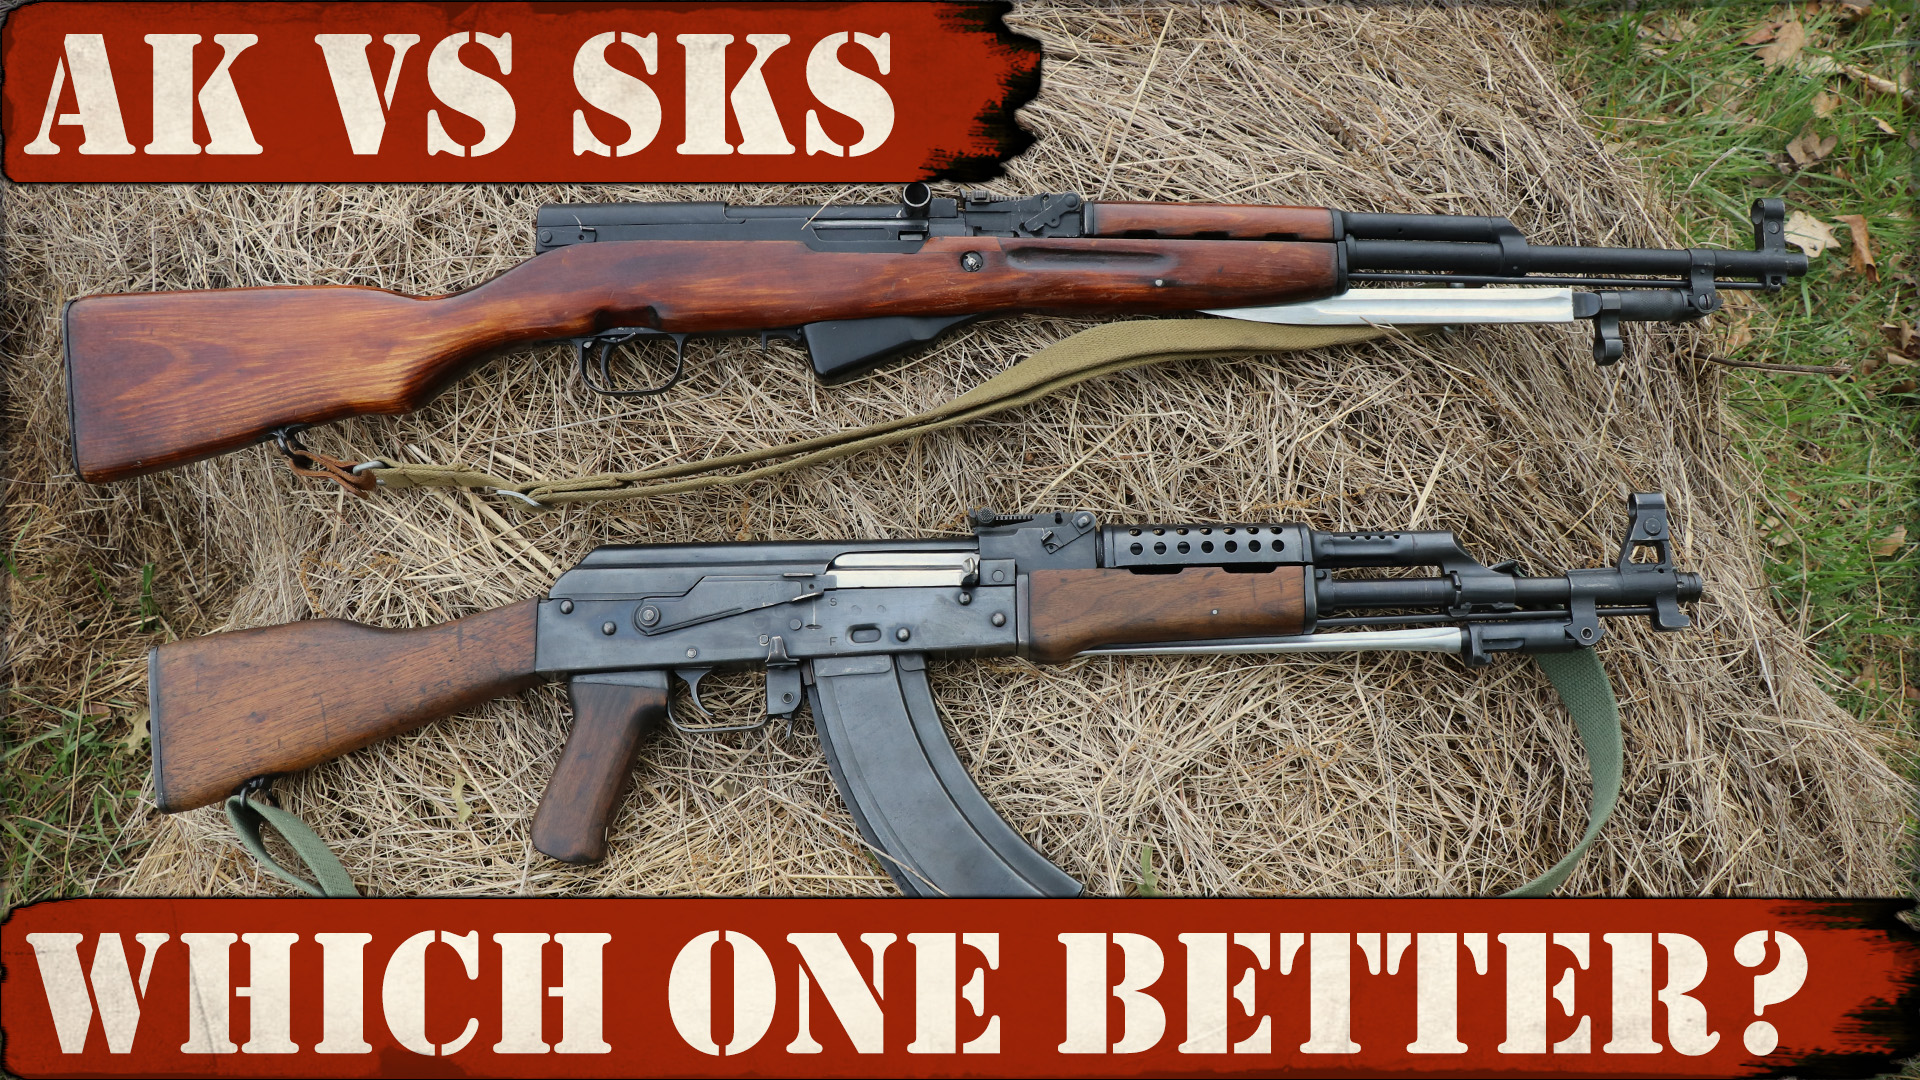 AK vs SKS – which one is better?